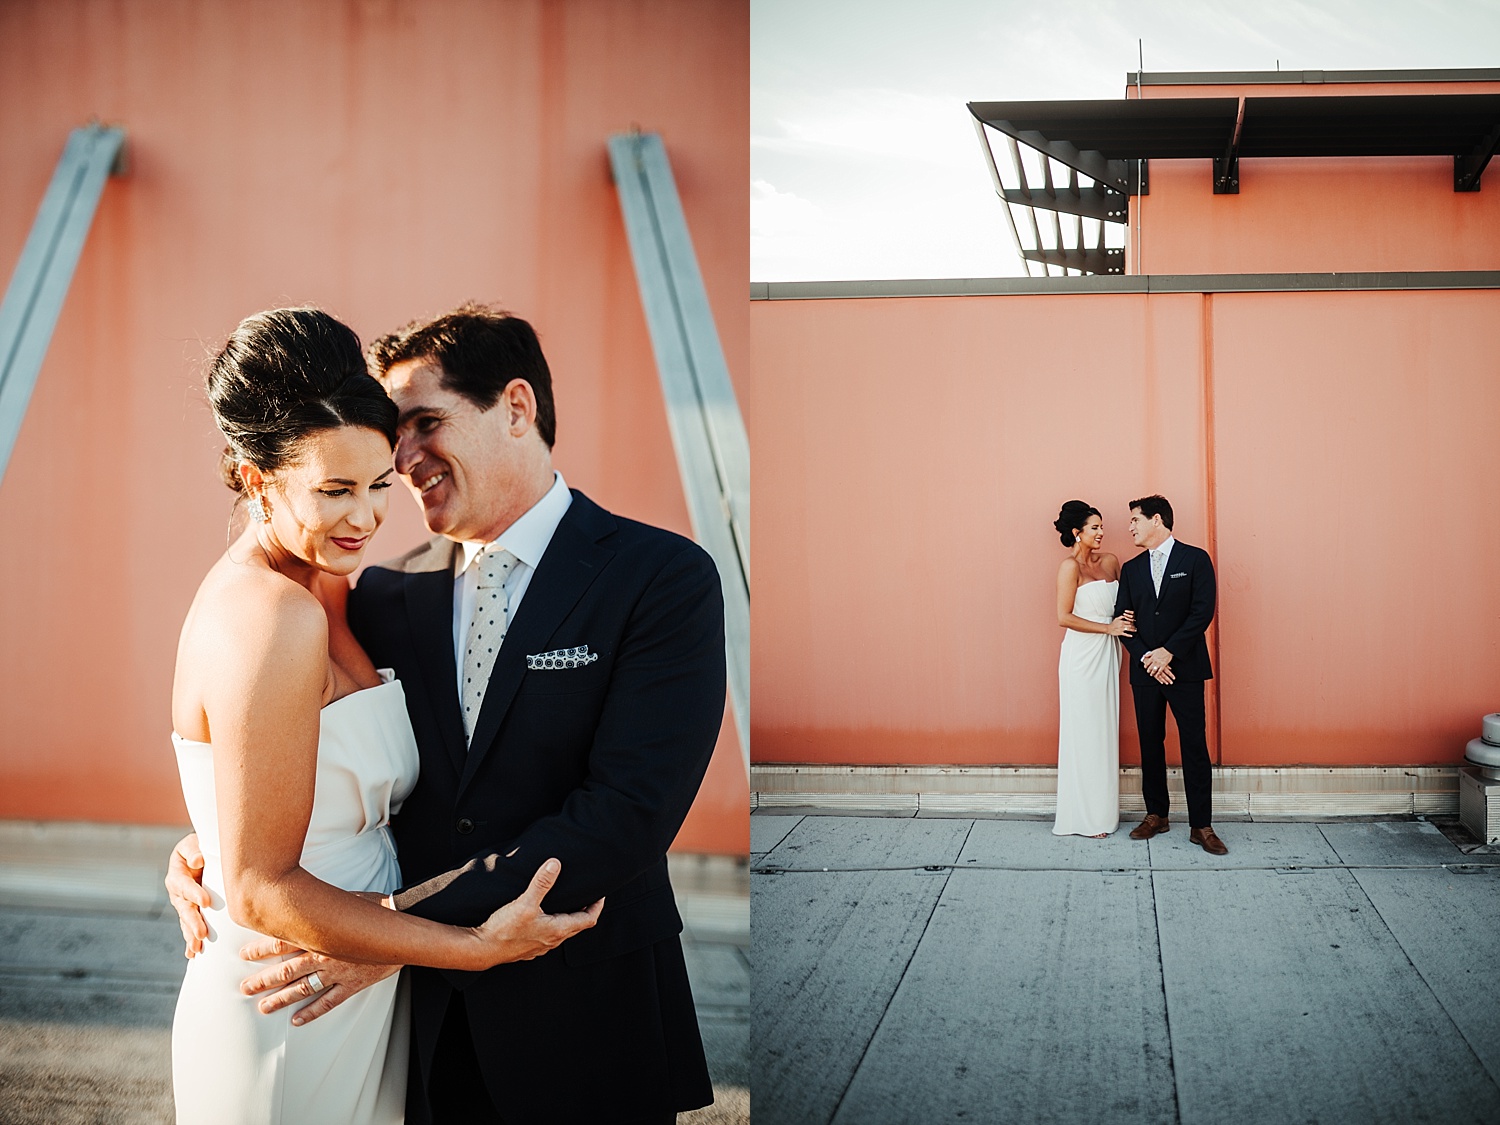 Don Me Now, Rooftop Anniversary Sessions, Rooftop Pictures Tampa, Ashley Izquierdo, Tampa Proposal Photographer, Tampa Couples Sessions, Tampa Wedding Photographers, Tampa Photographer, Tampa Wedding Photographer, Florida Wedding Photographer, Channelside Couples Pictures, Bubbly Barchique, Tampa Engagement Session Photos, Tampa Engagement Ideas